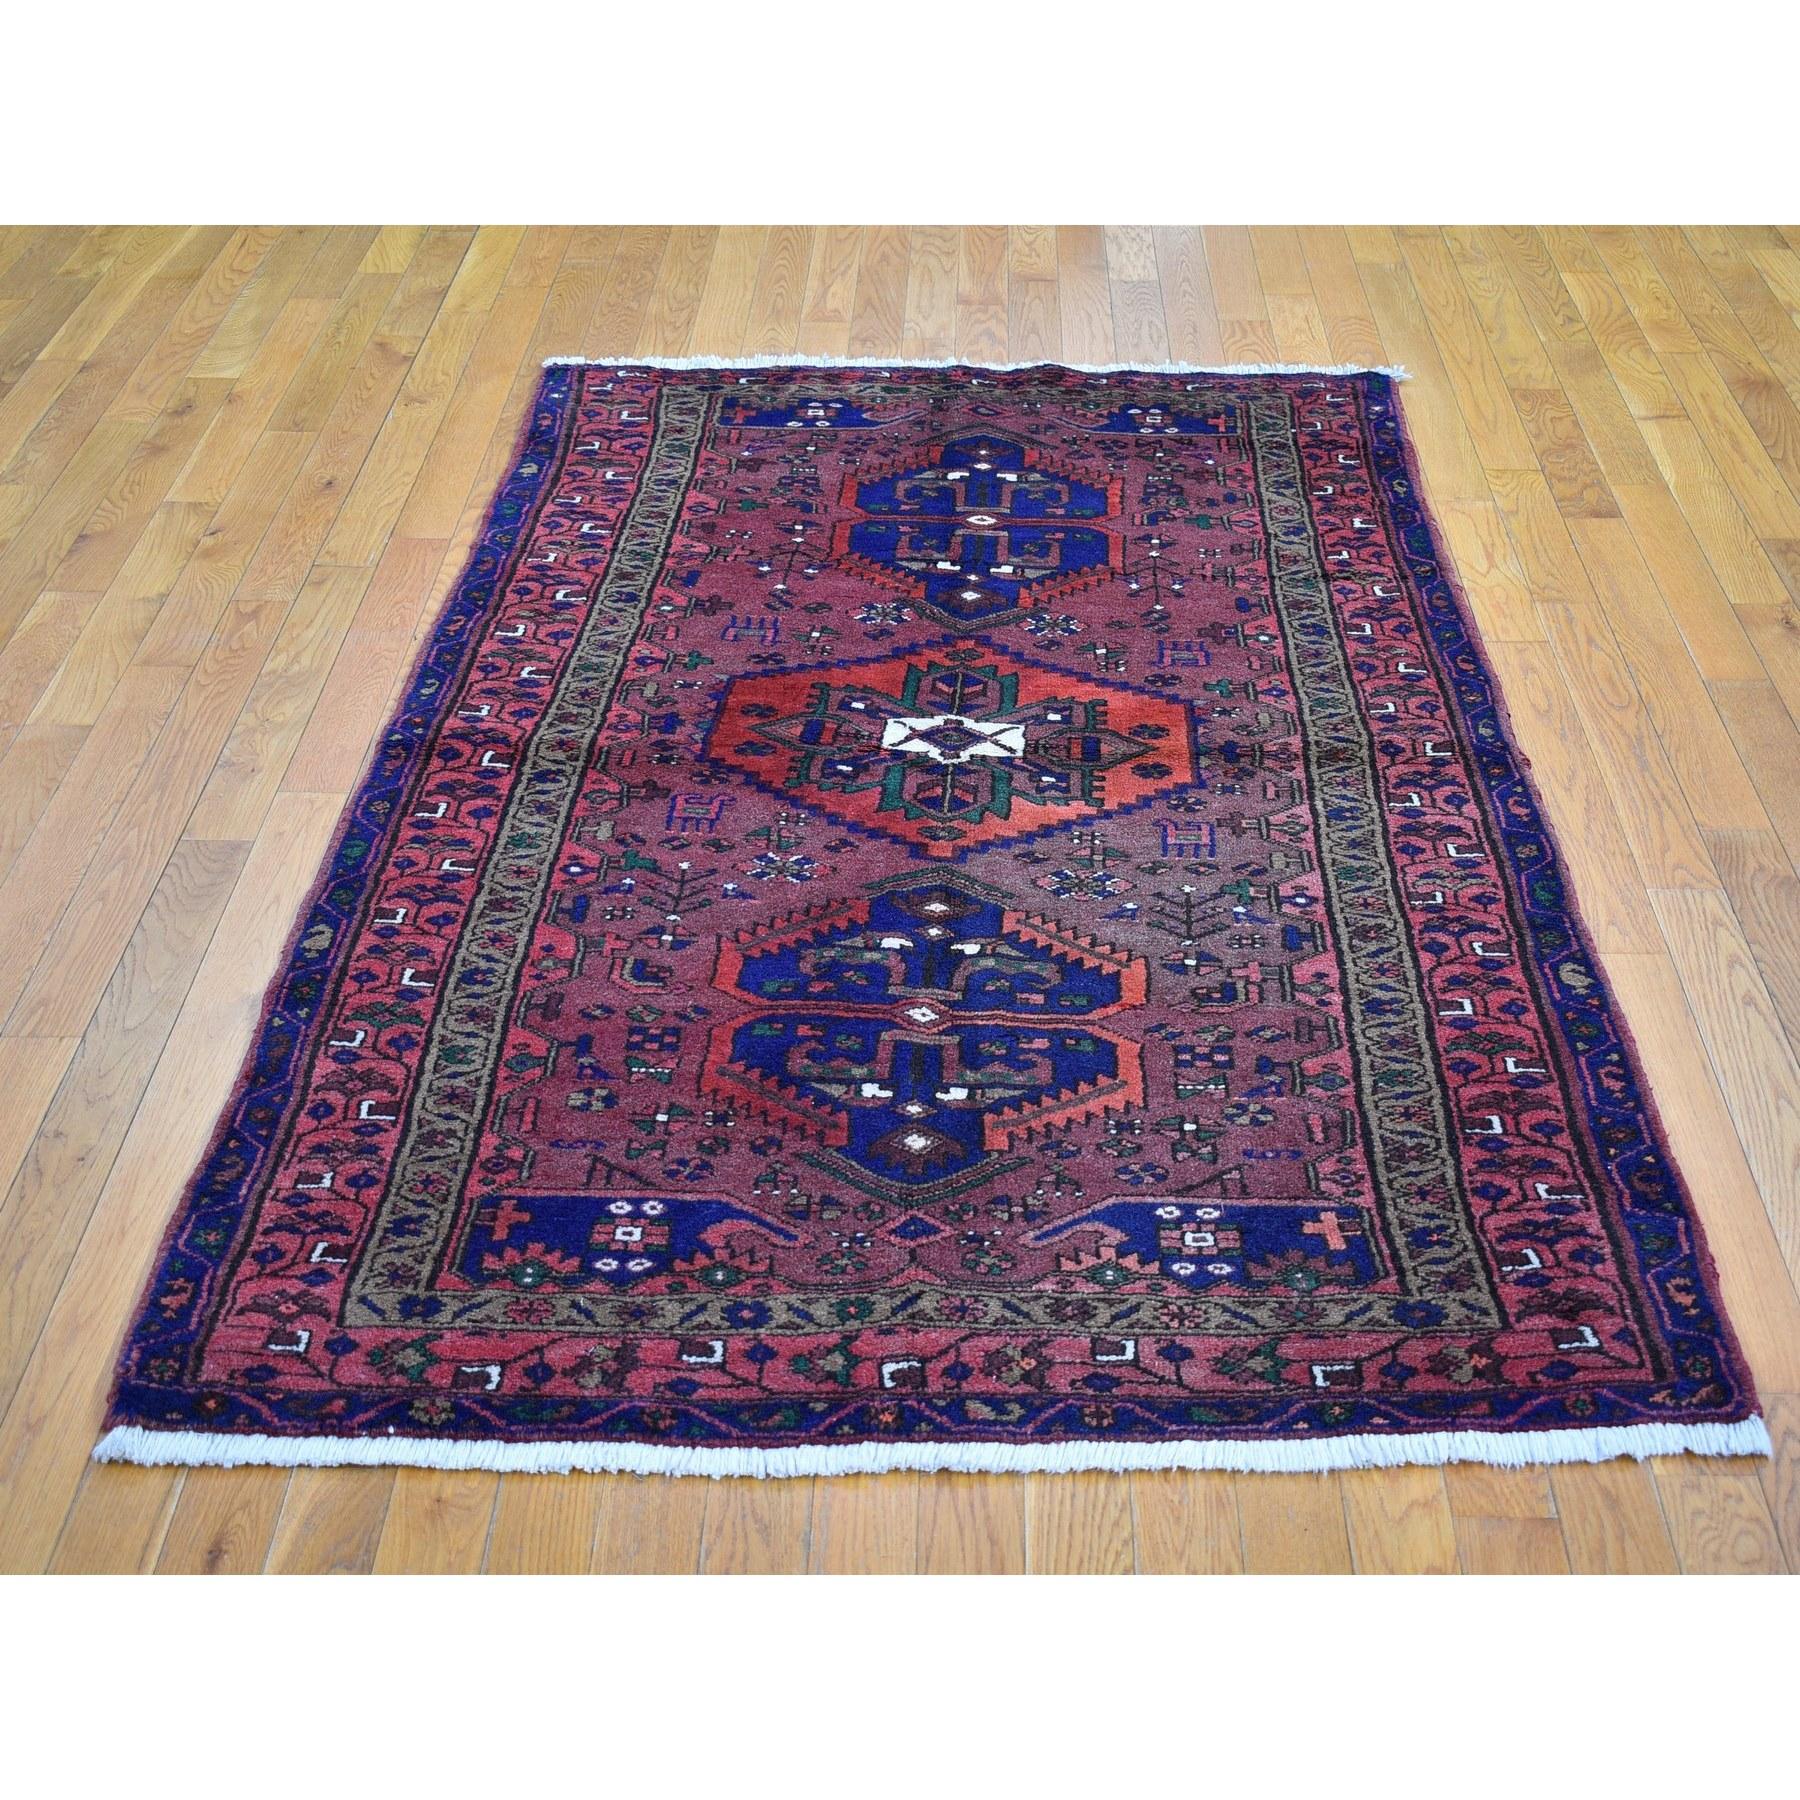 This fabulous hand-knotted carpet has been created and designed for extra strength and durability. This rug has been handcrafted for weeks in the traditional method that is used to make
Exact rug size in feet and inches : 4'3